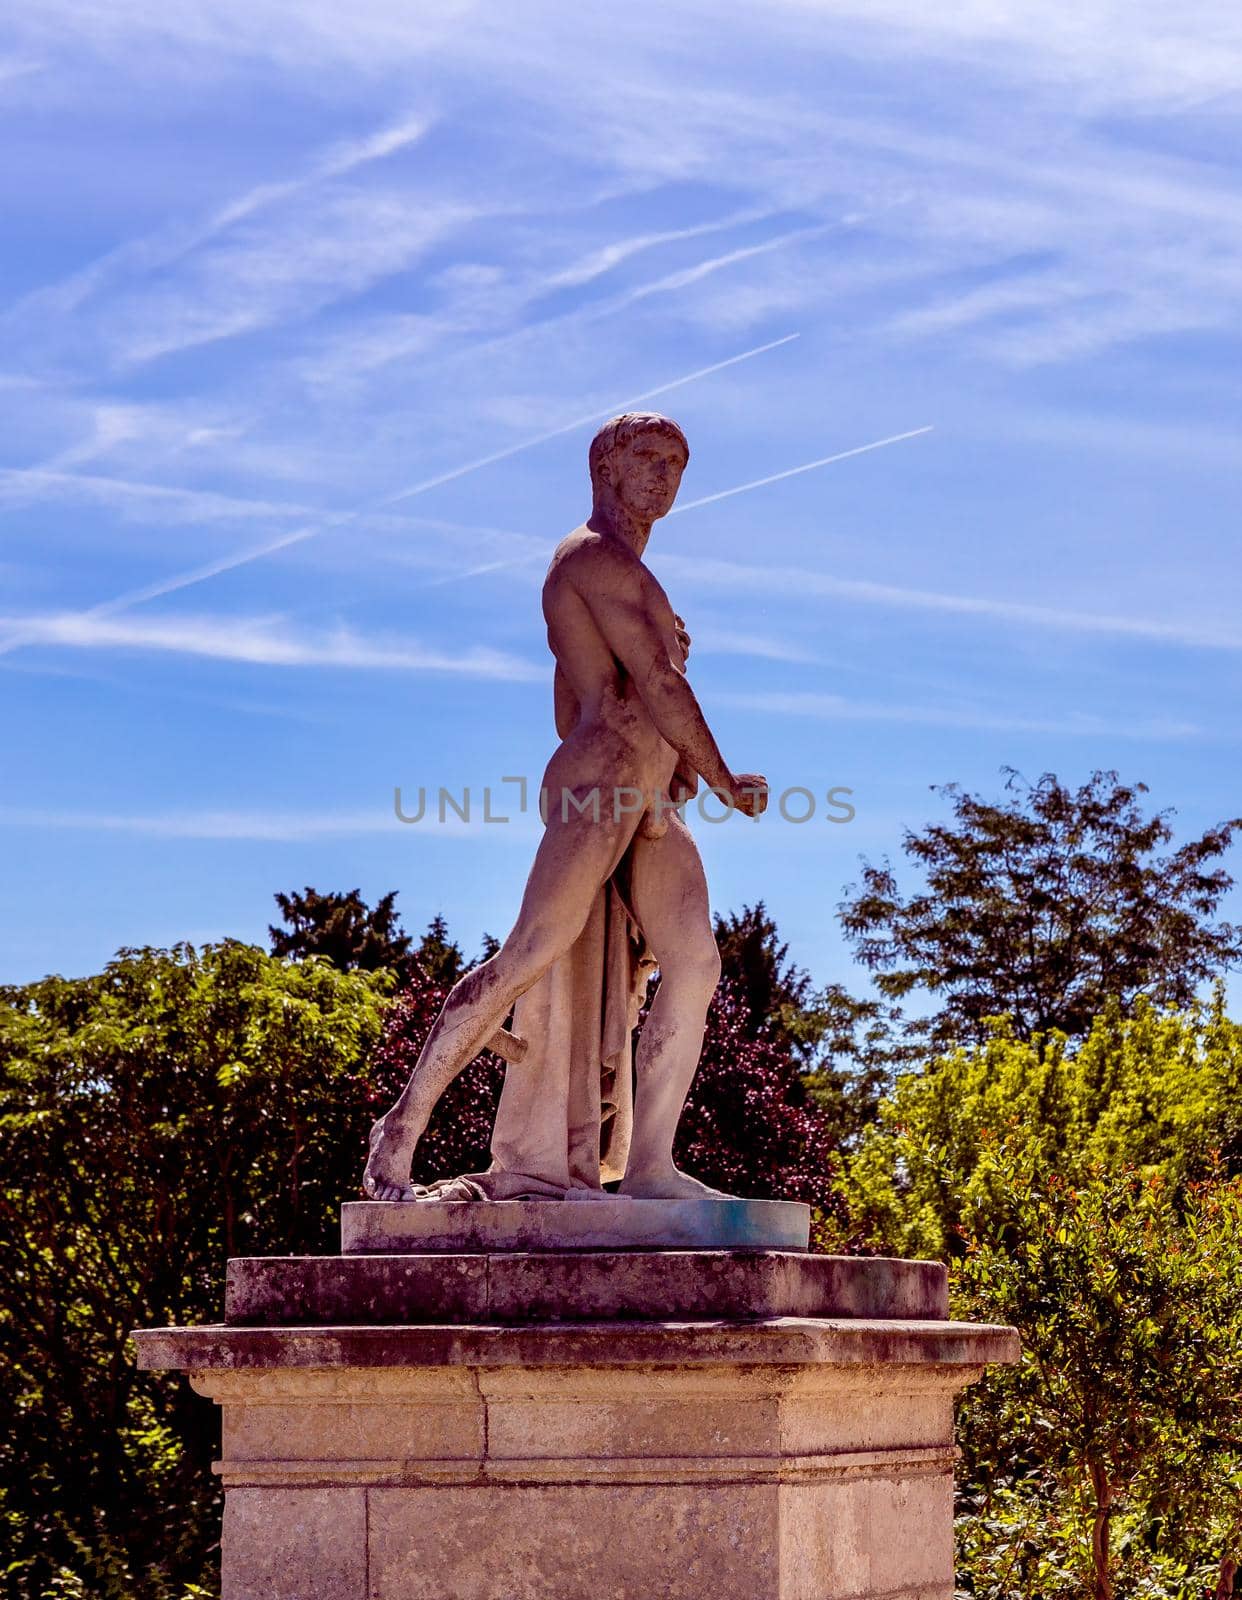 COMPIEGNE, FRANCE, AUGUST 13, 2016 : statue in gardens of chateau de Compiegne, august 13, 2016 in Compiegne, Oise, France